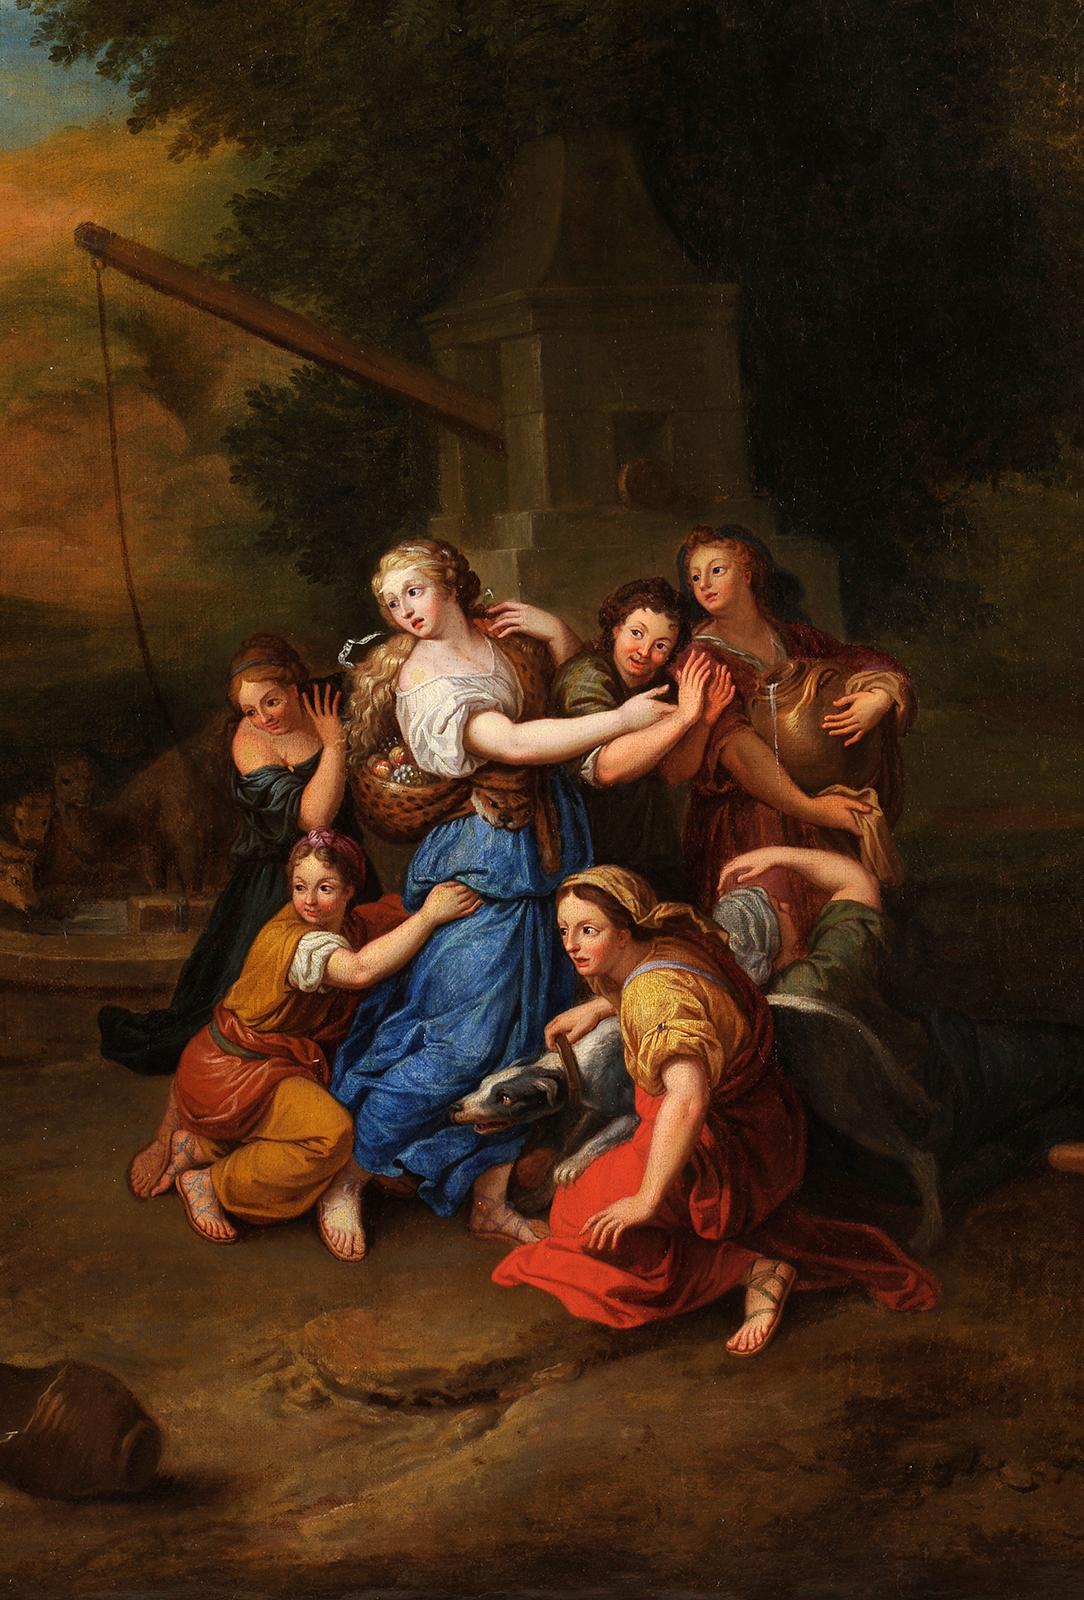 Workshop of Louis de BOULLOGNE
(Paris 1654 – Paris 1733)
Moses defending the daughters of Jethro
Oil on canvas
H. 75 cm; W. 106 cm

Produced at the end of the 17th century, this fairly large-format painting is a reworking of a work by the great